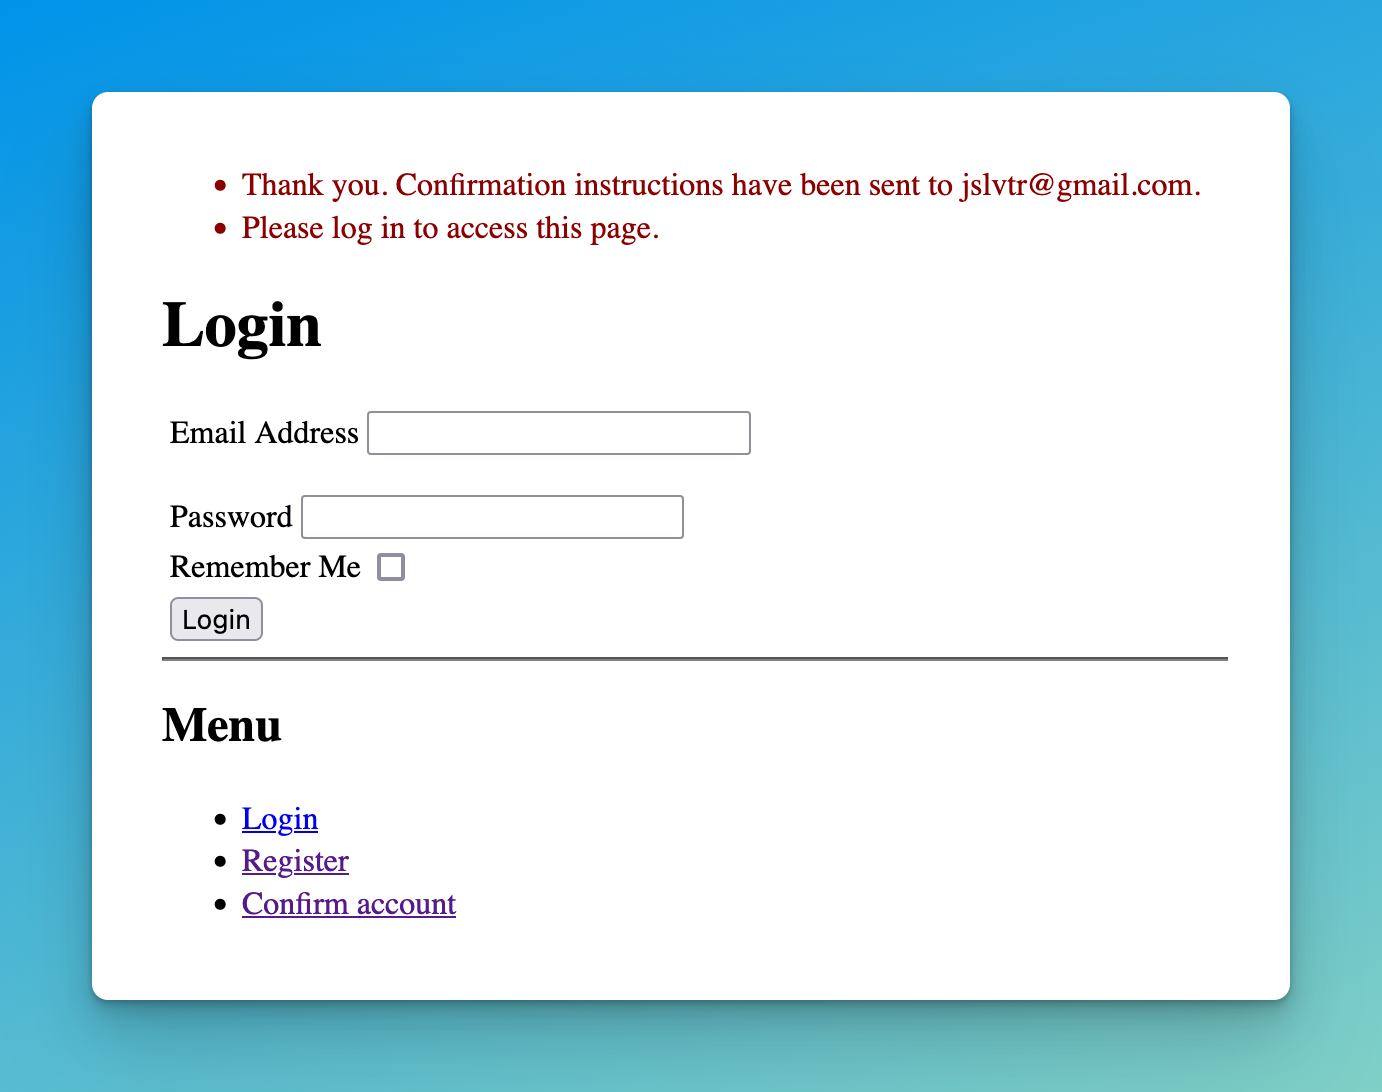 Screenshot showing the login page of our application with two bullet points at the top